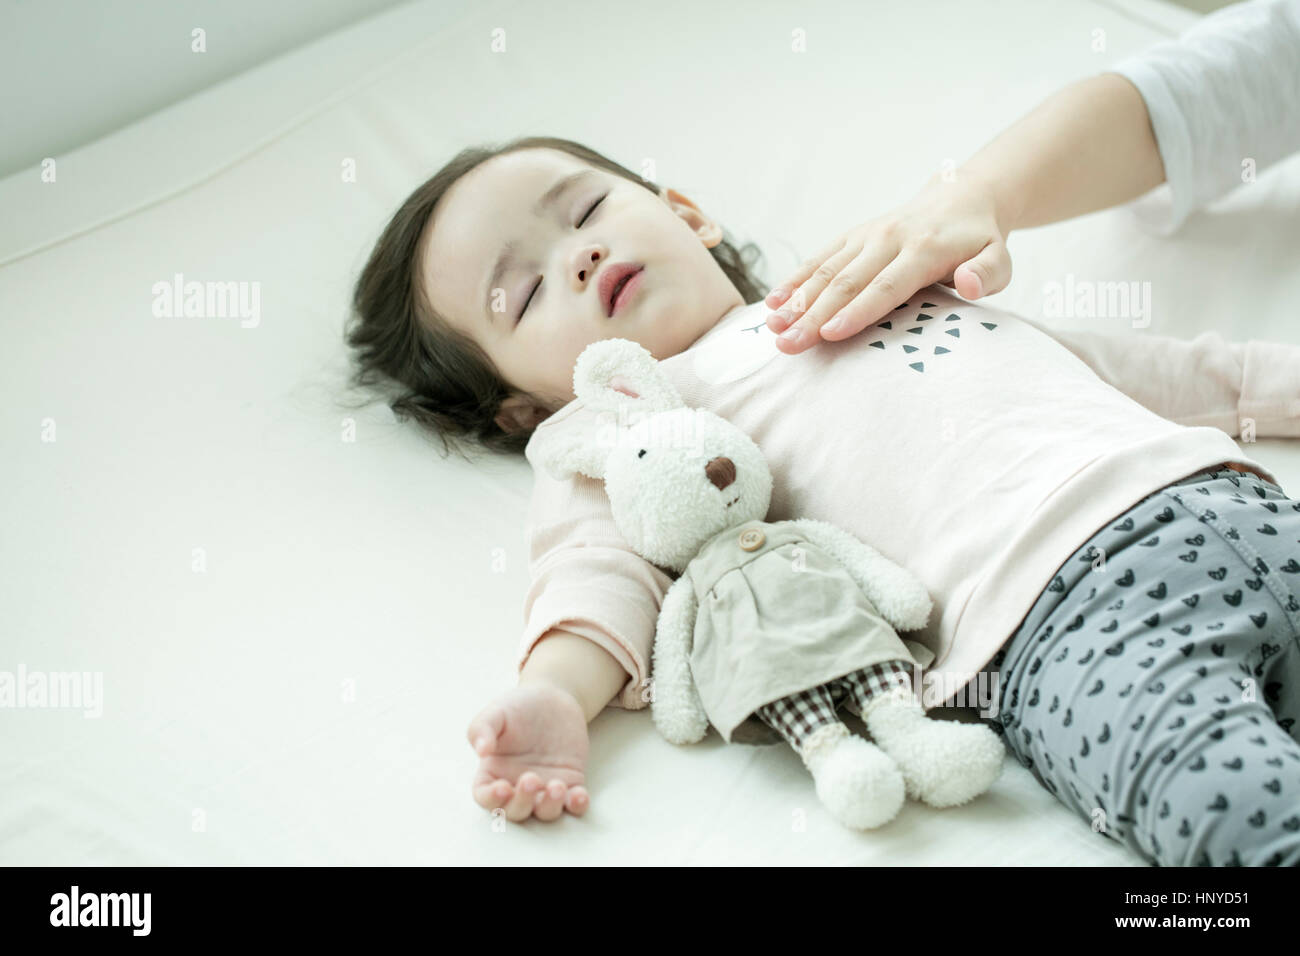 Hand touching sleeping baby's belly Stock Photo